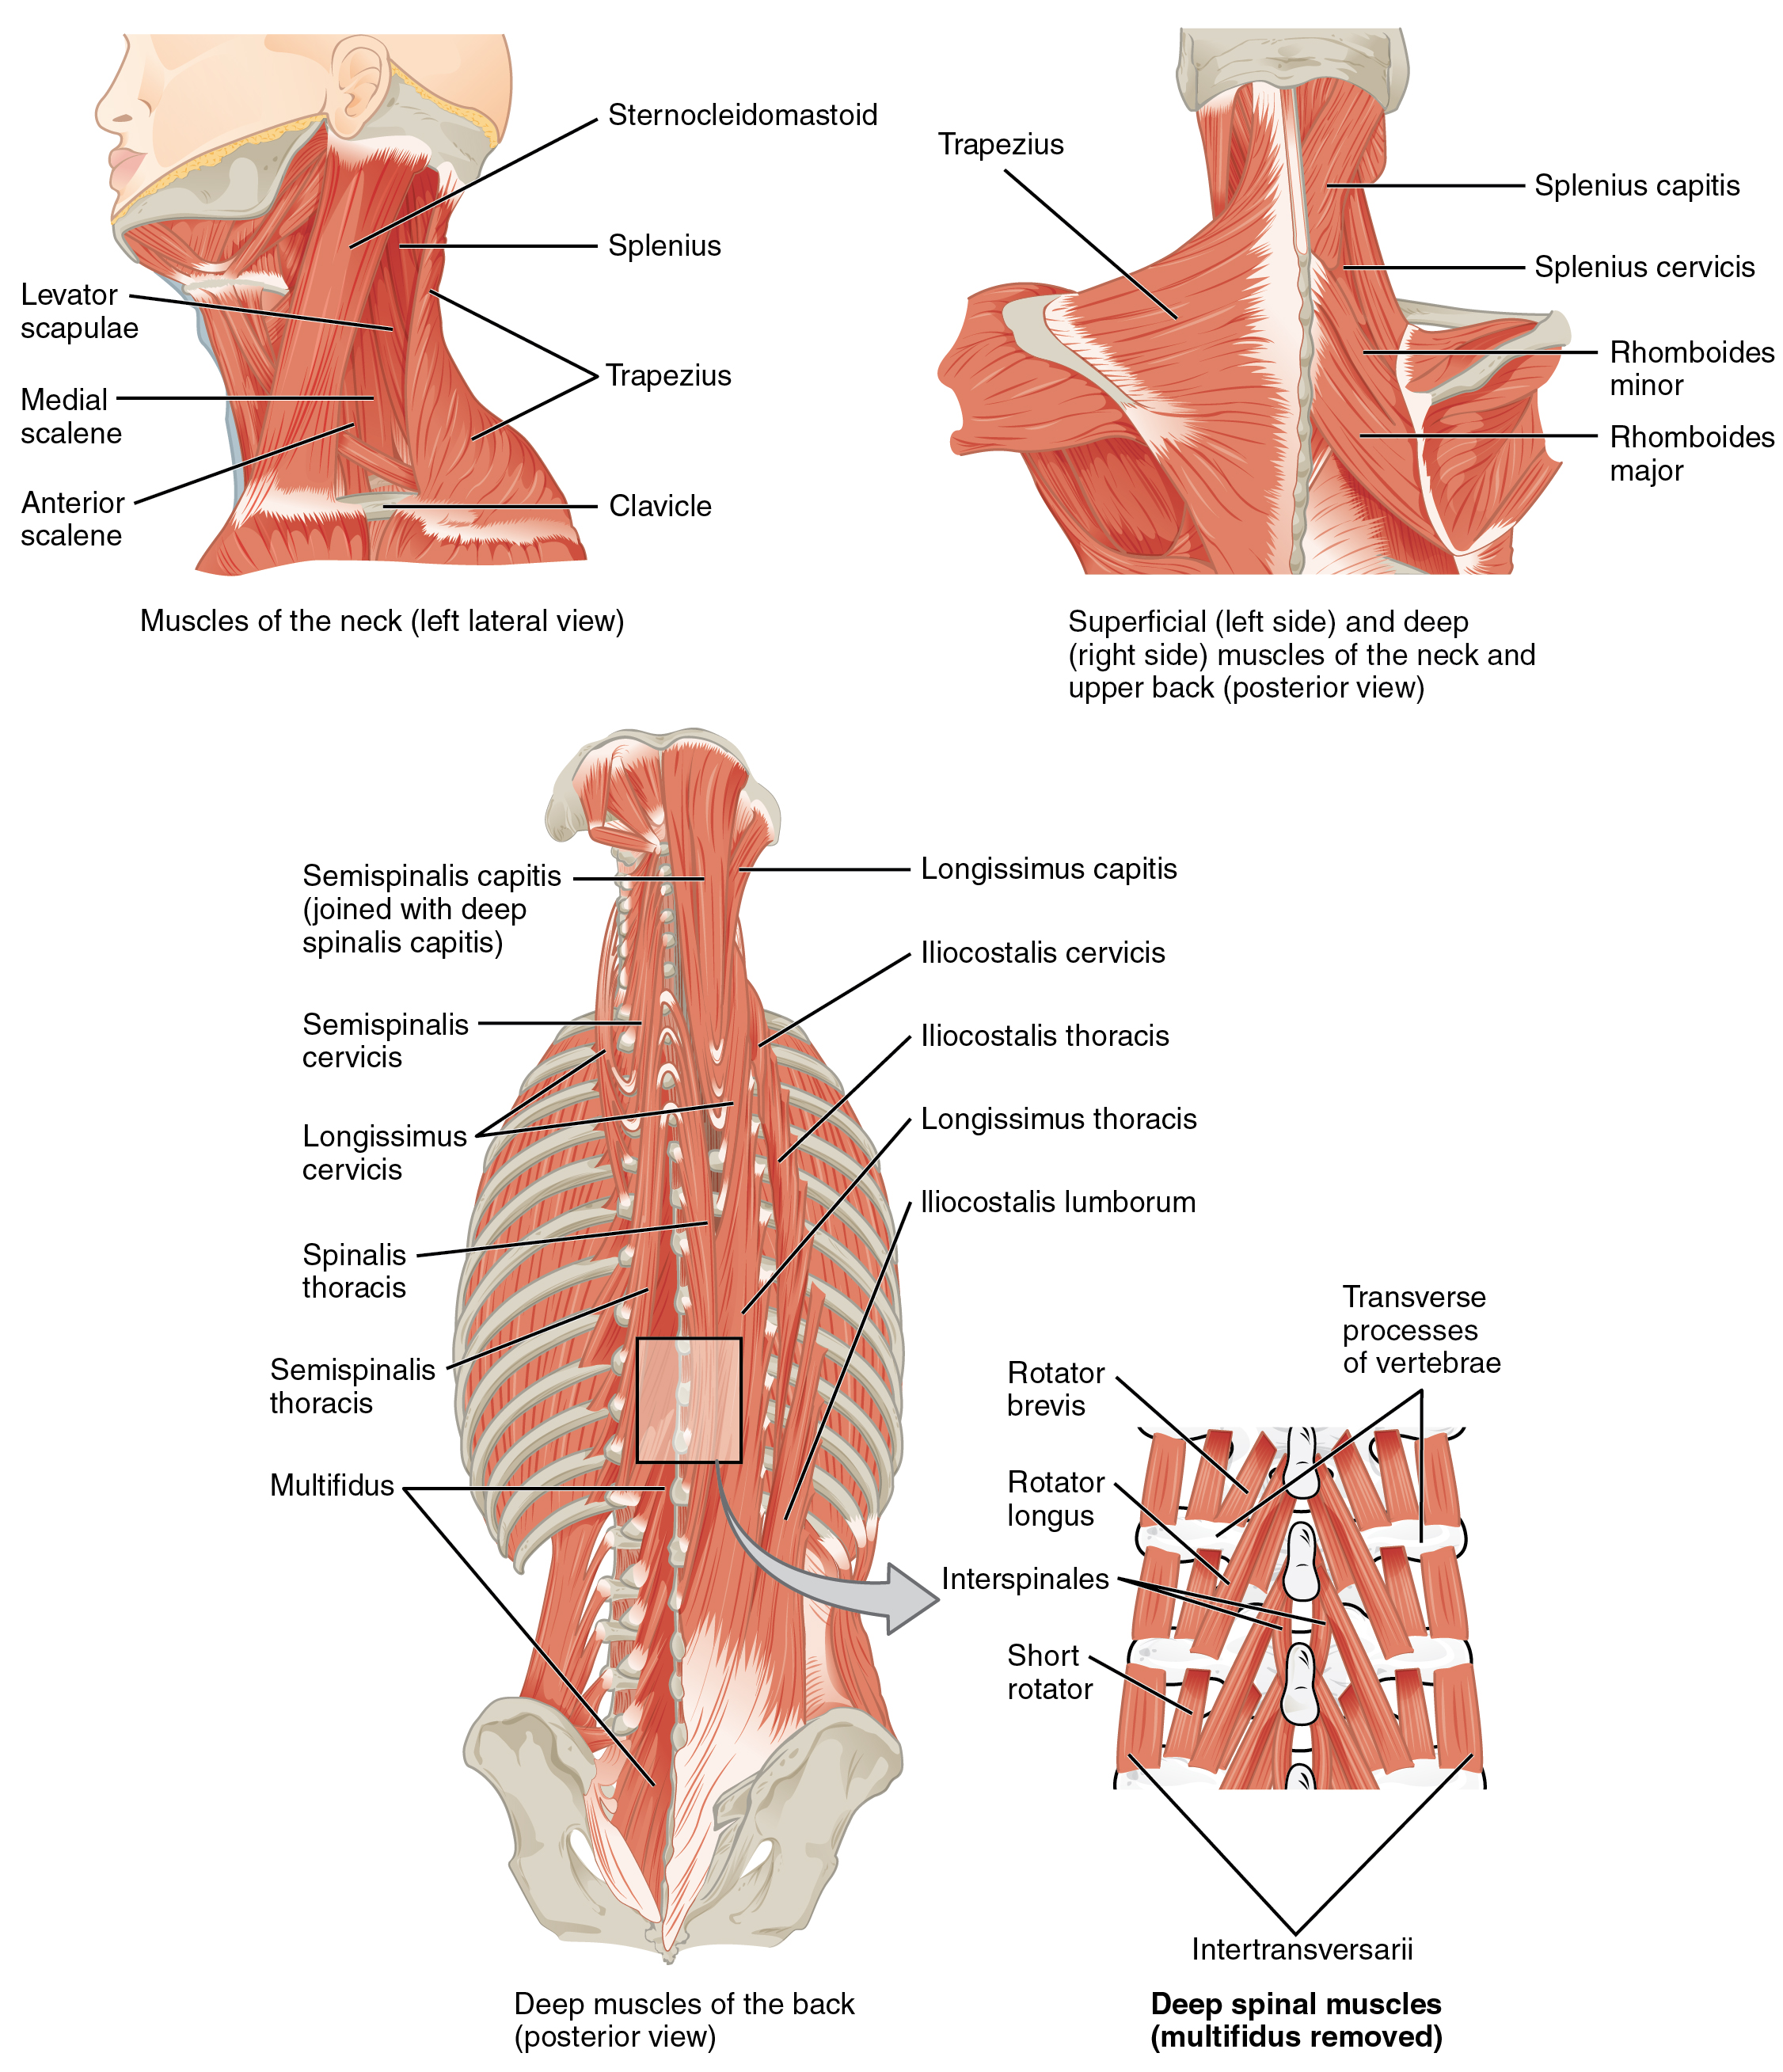 1117_Muscles_of_the_Neck_and_Back.jpg